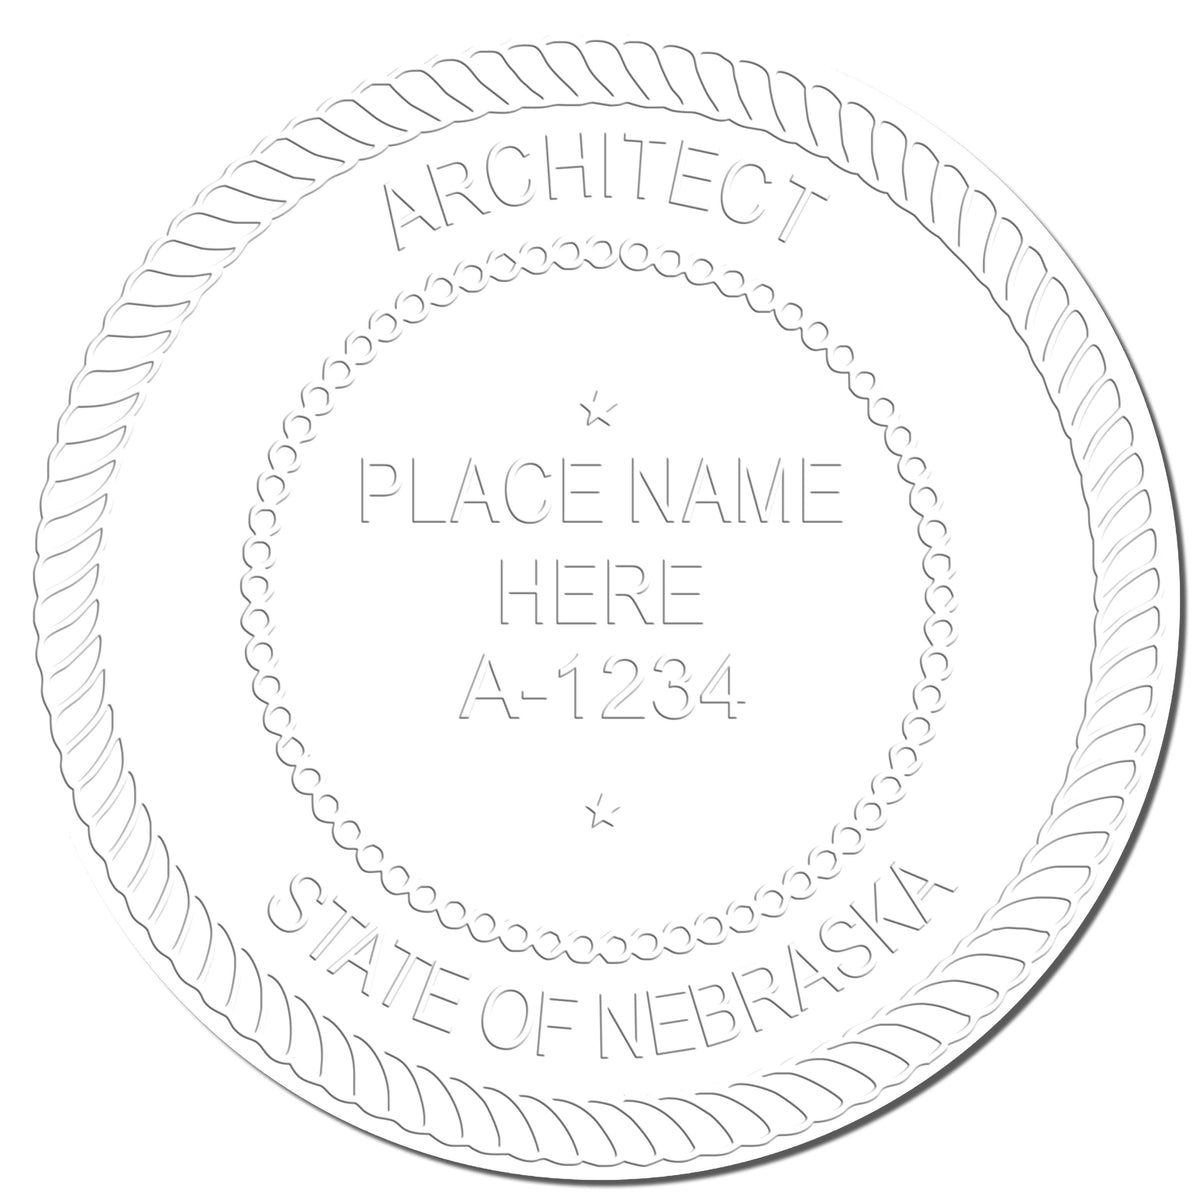 This paper is stamped with a sample imprint of the Heavy Duty Cast Iron Nebraska Architect Embosser, signifying its quality and reliability.